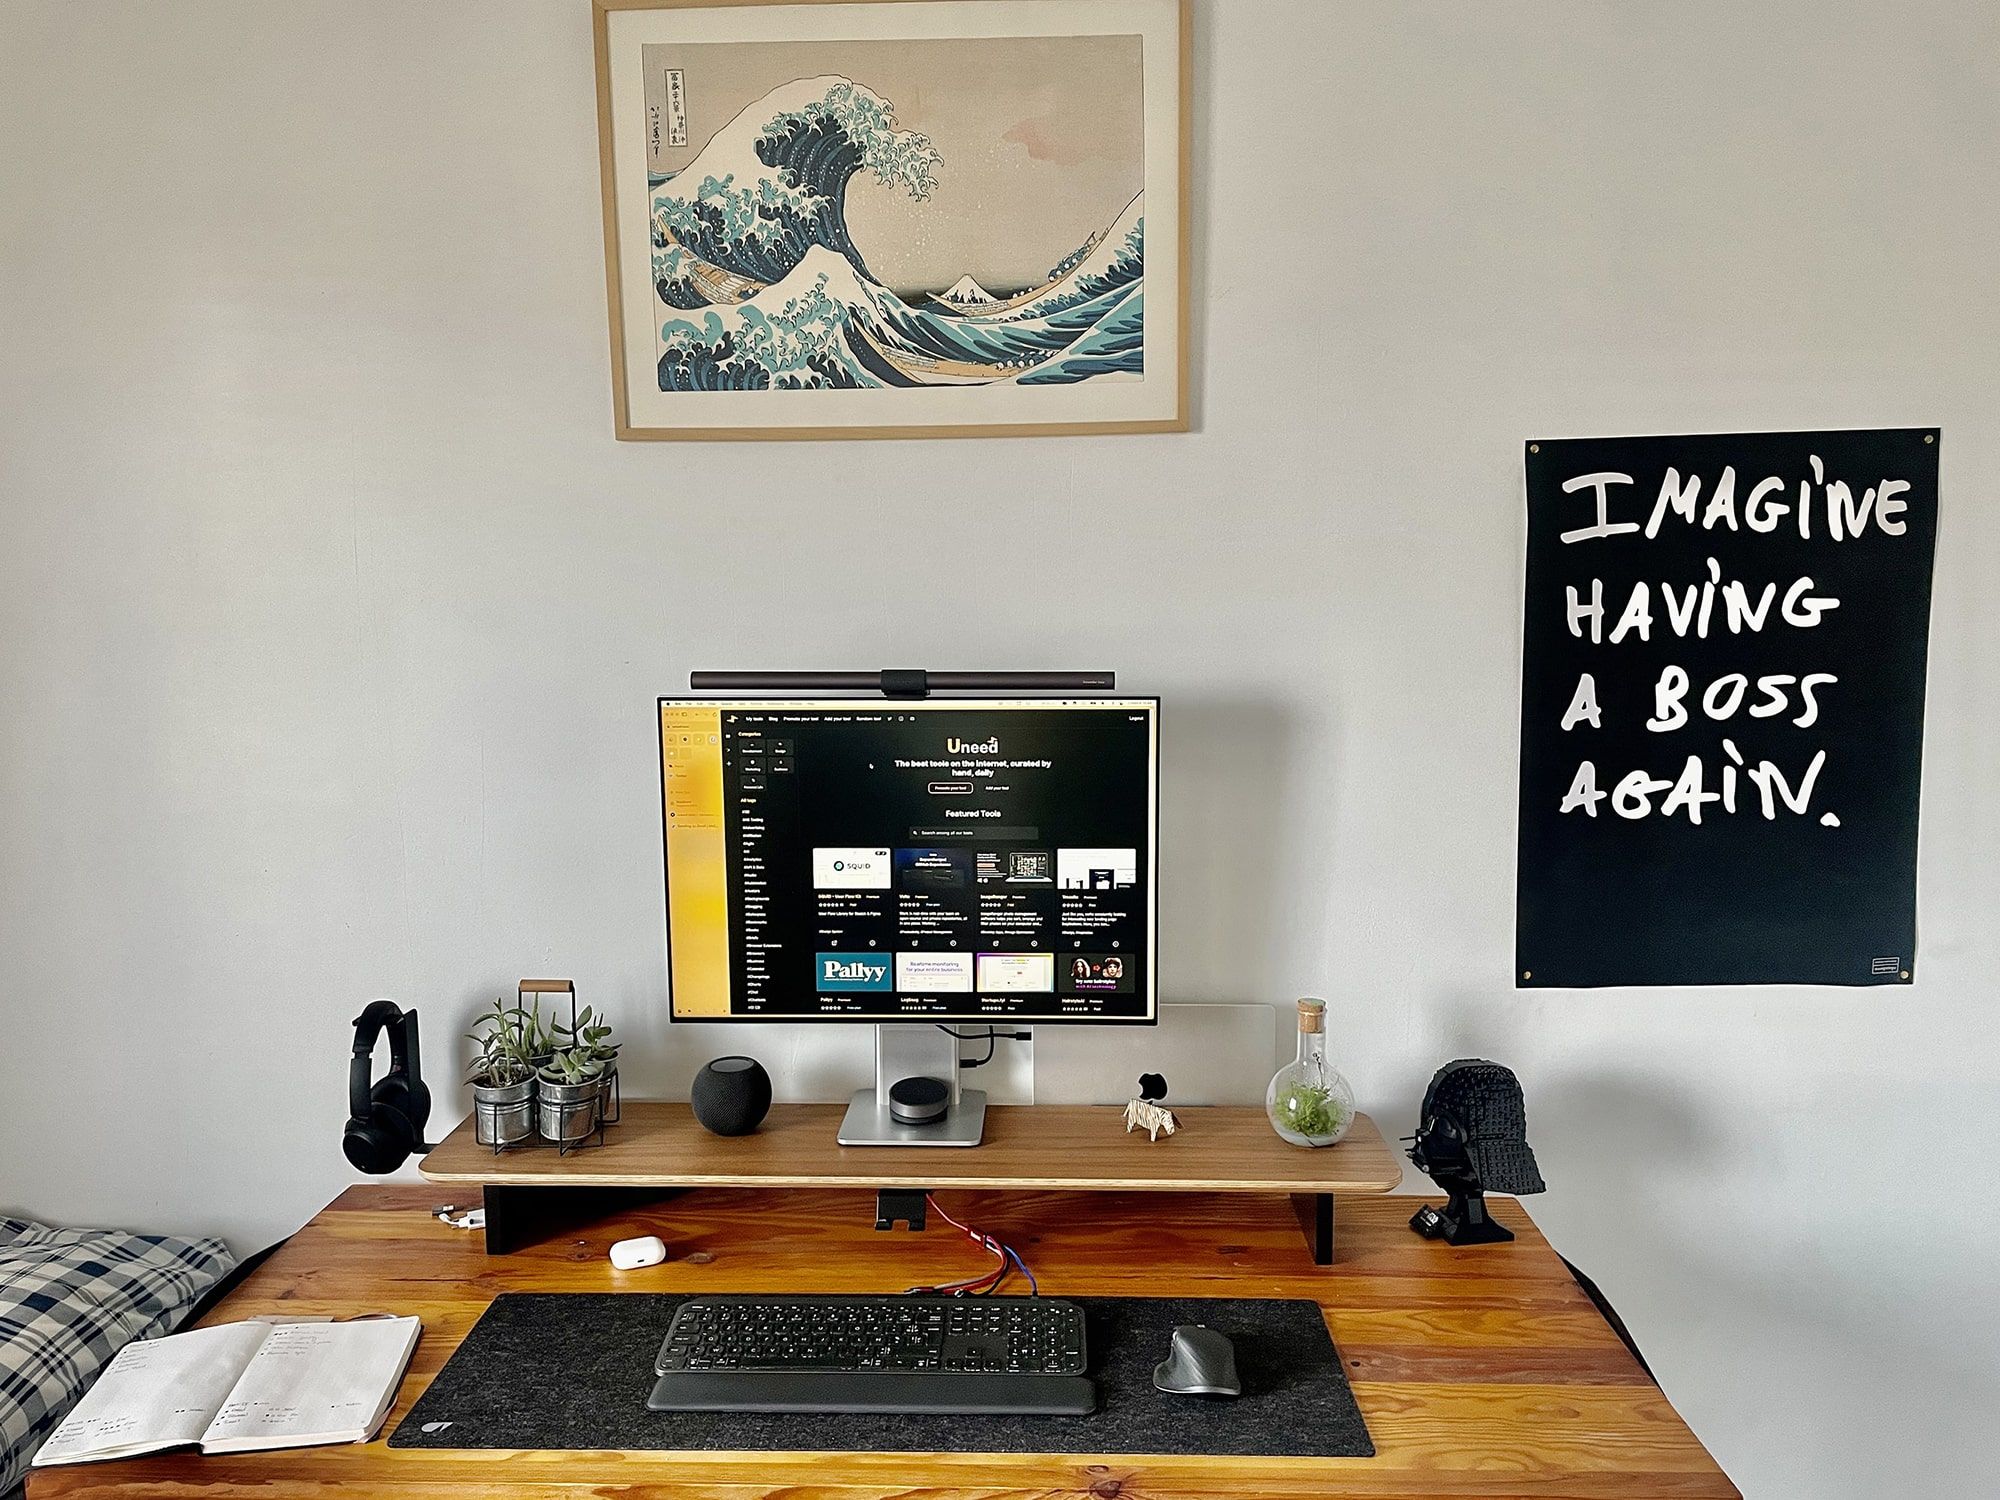 A black framed poster on the right side of a modern workspace, featuring white bold text that reads “Imagine having a boss again” against a dark background